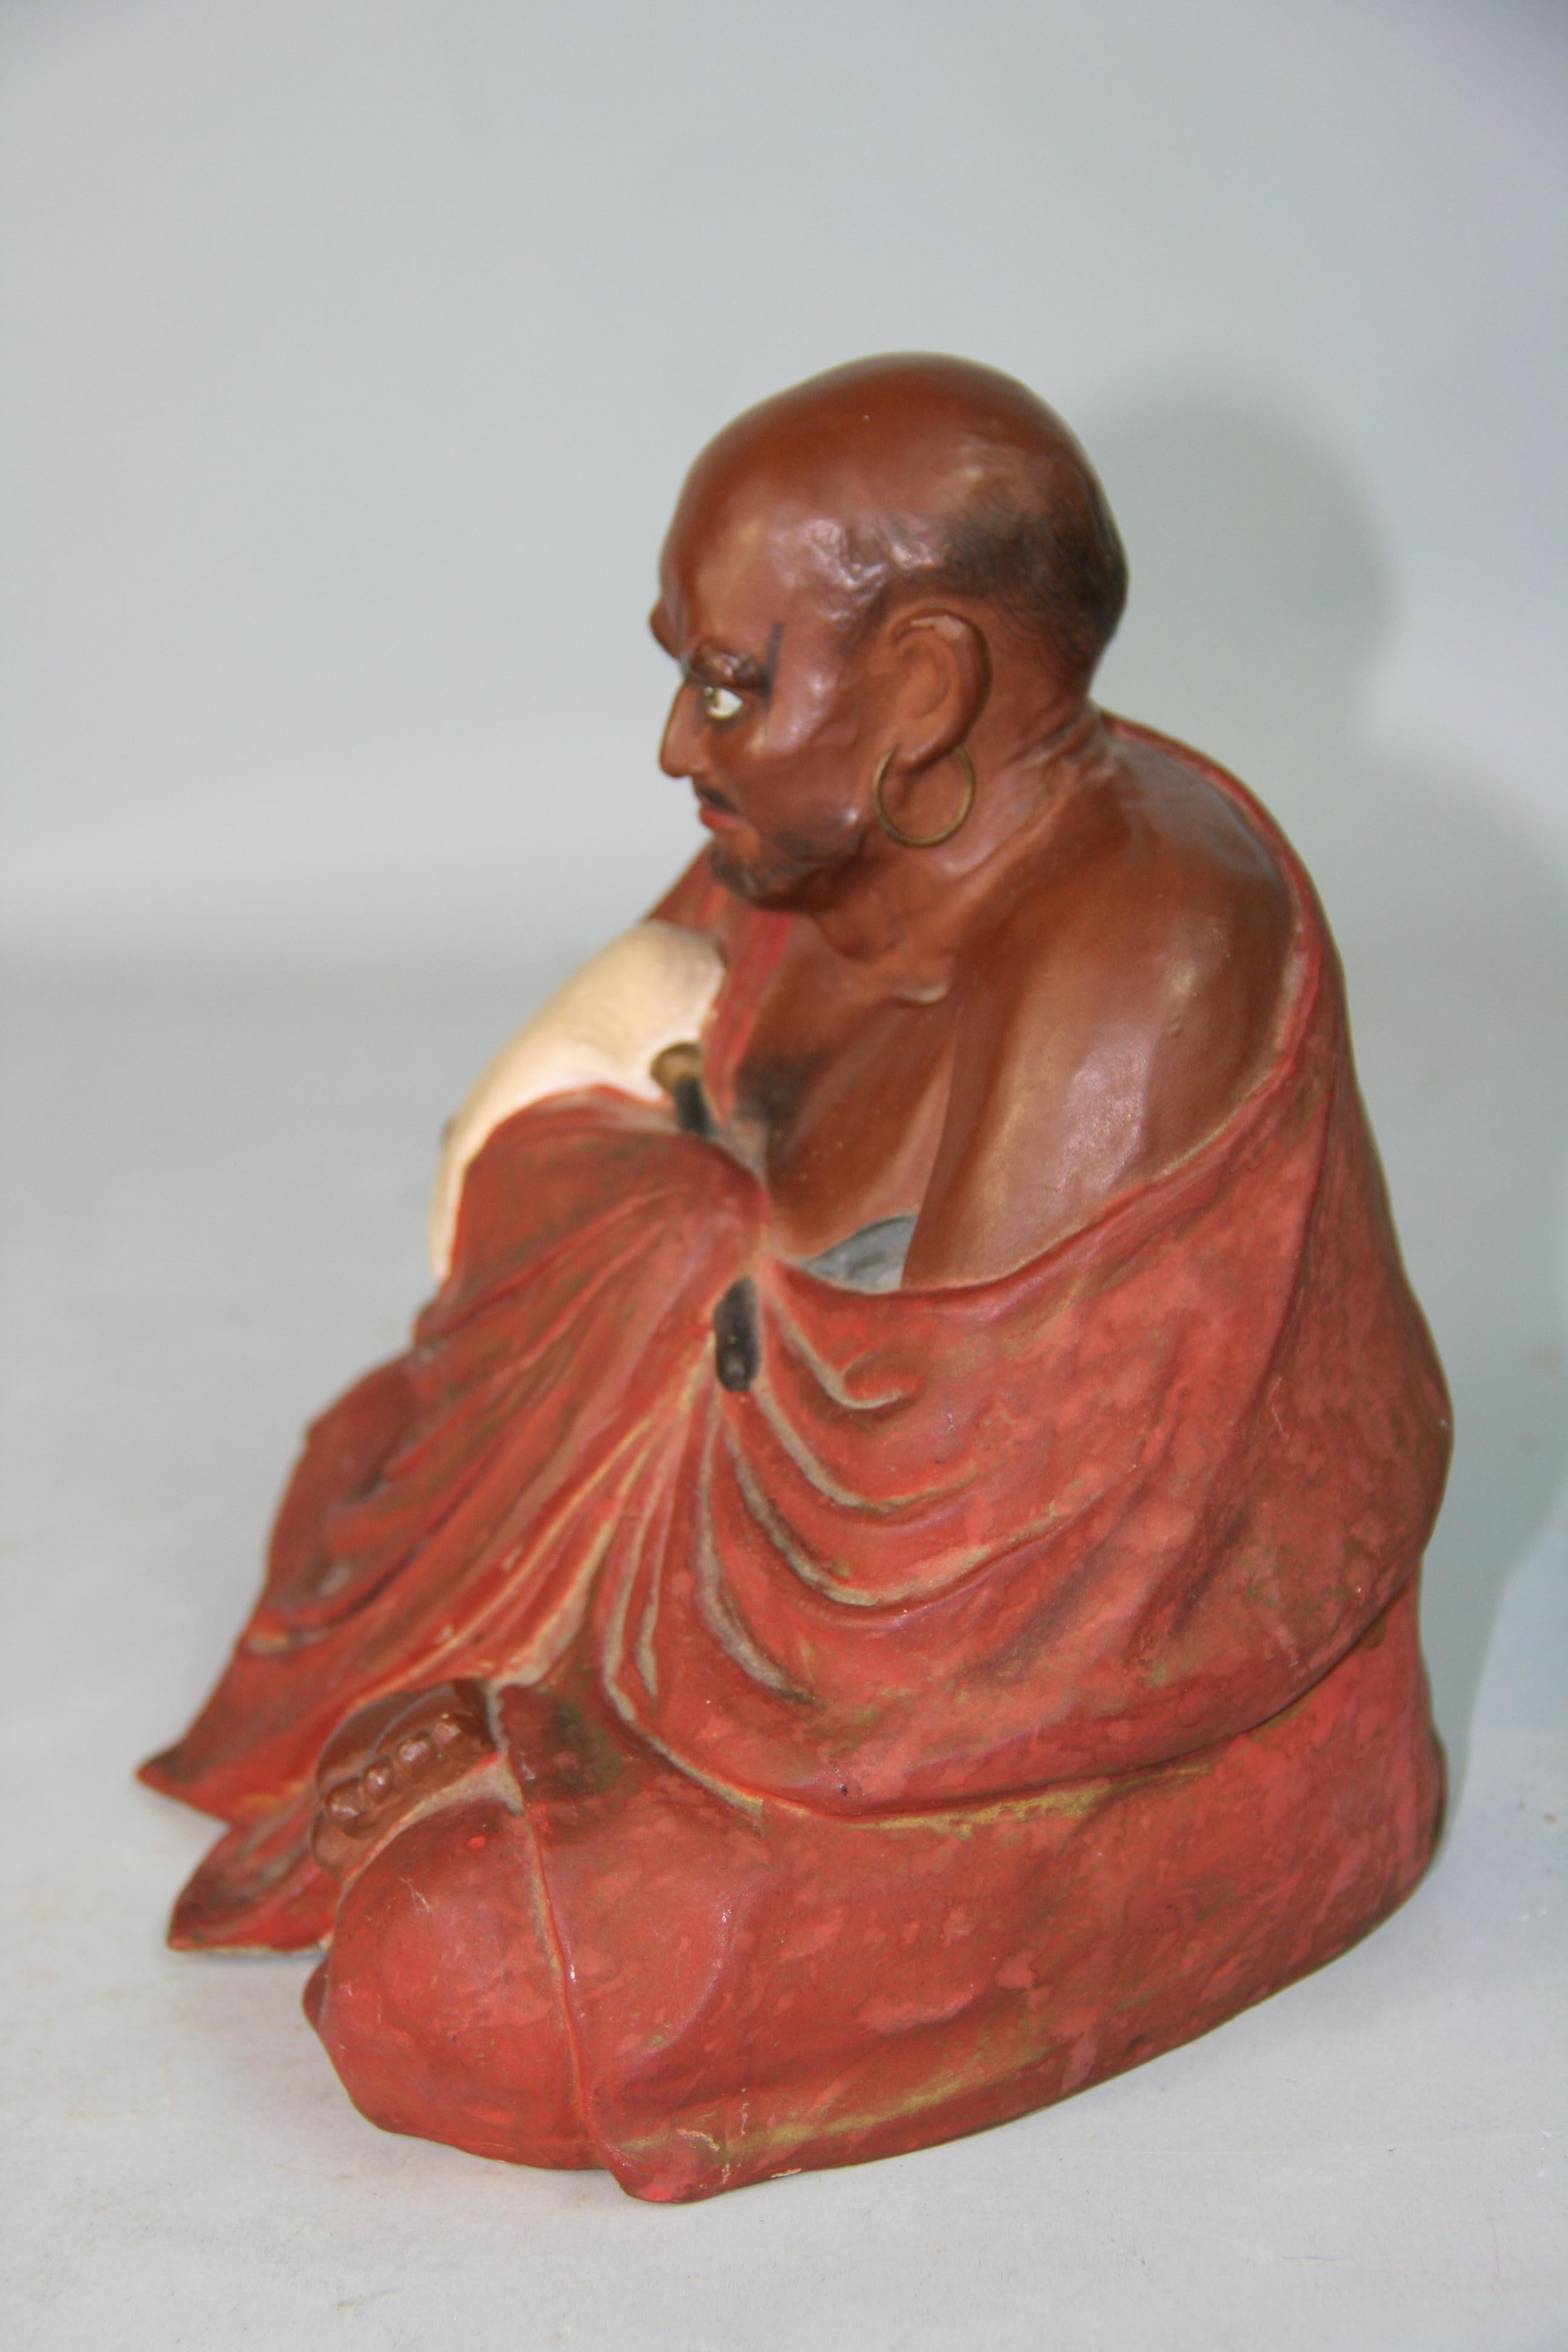 Antique Japanese Seated Ceramic Buddhist  Monk  Sculpture For Sale 1